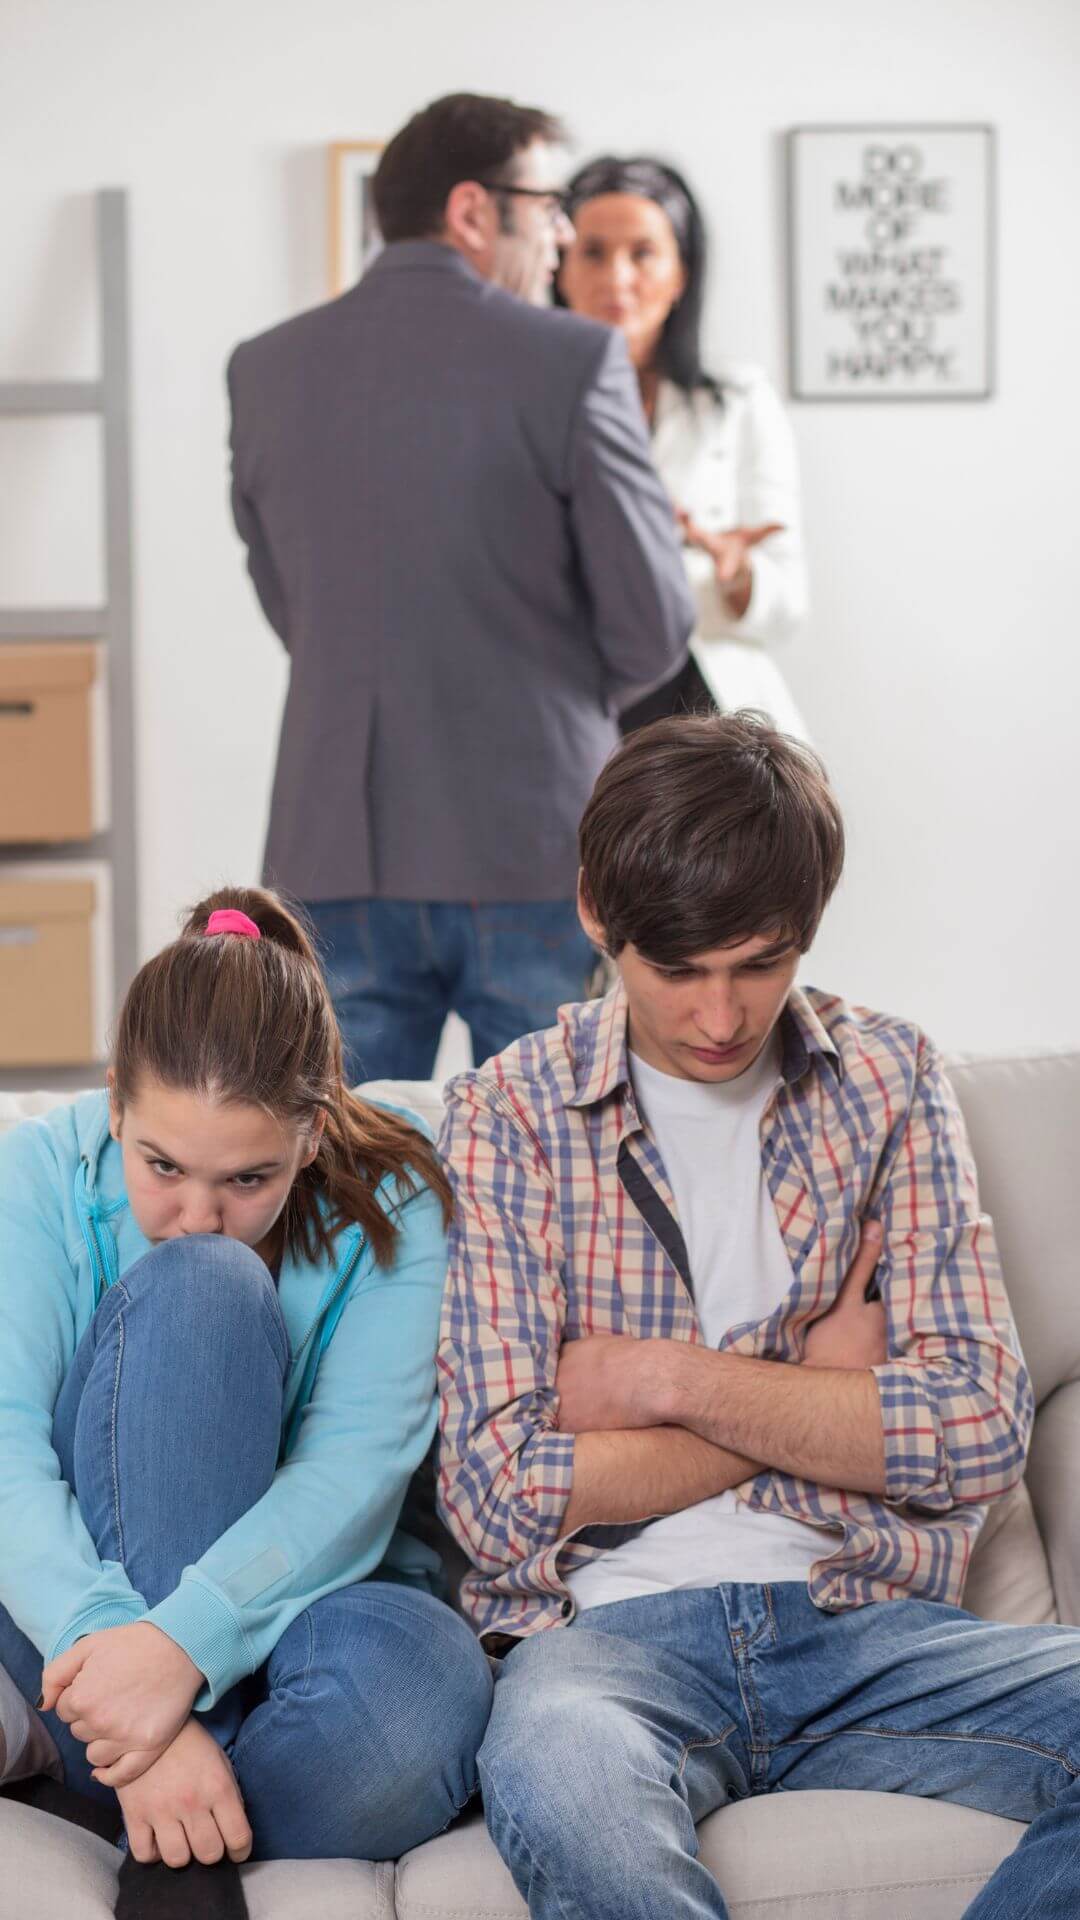 Maintaining Your Parental Relationship After a High-Conflict Divorce